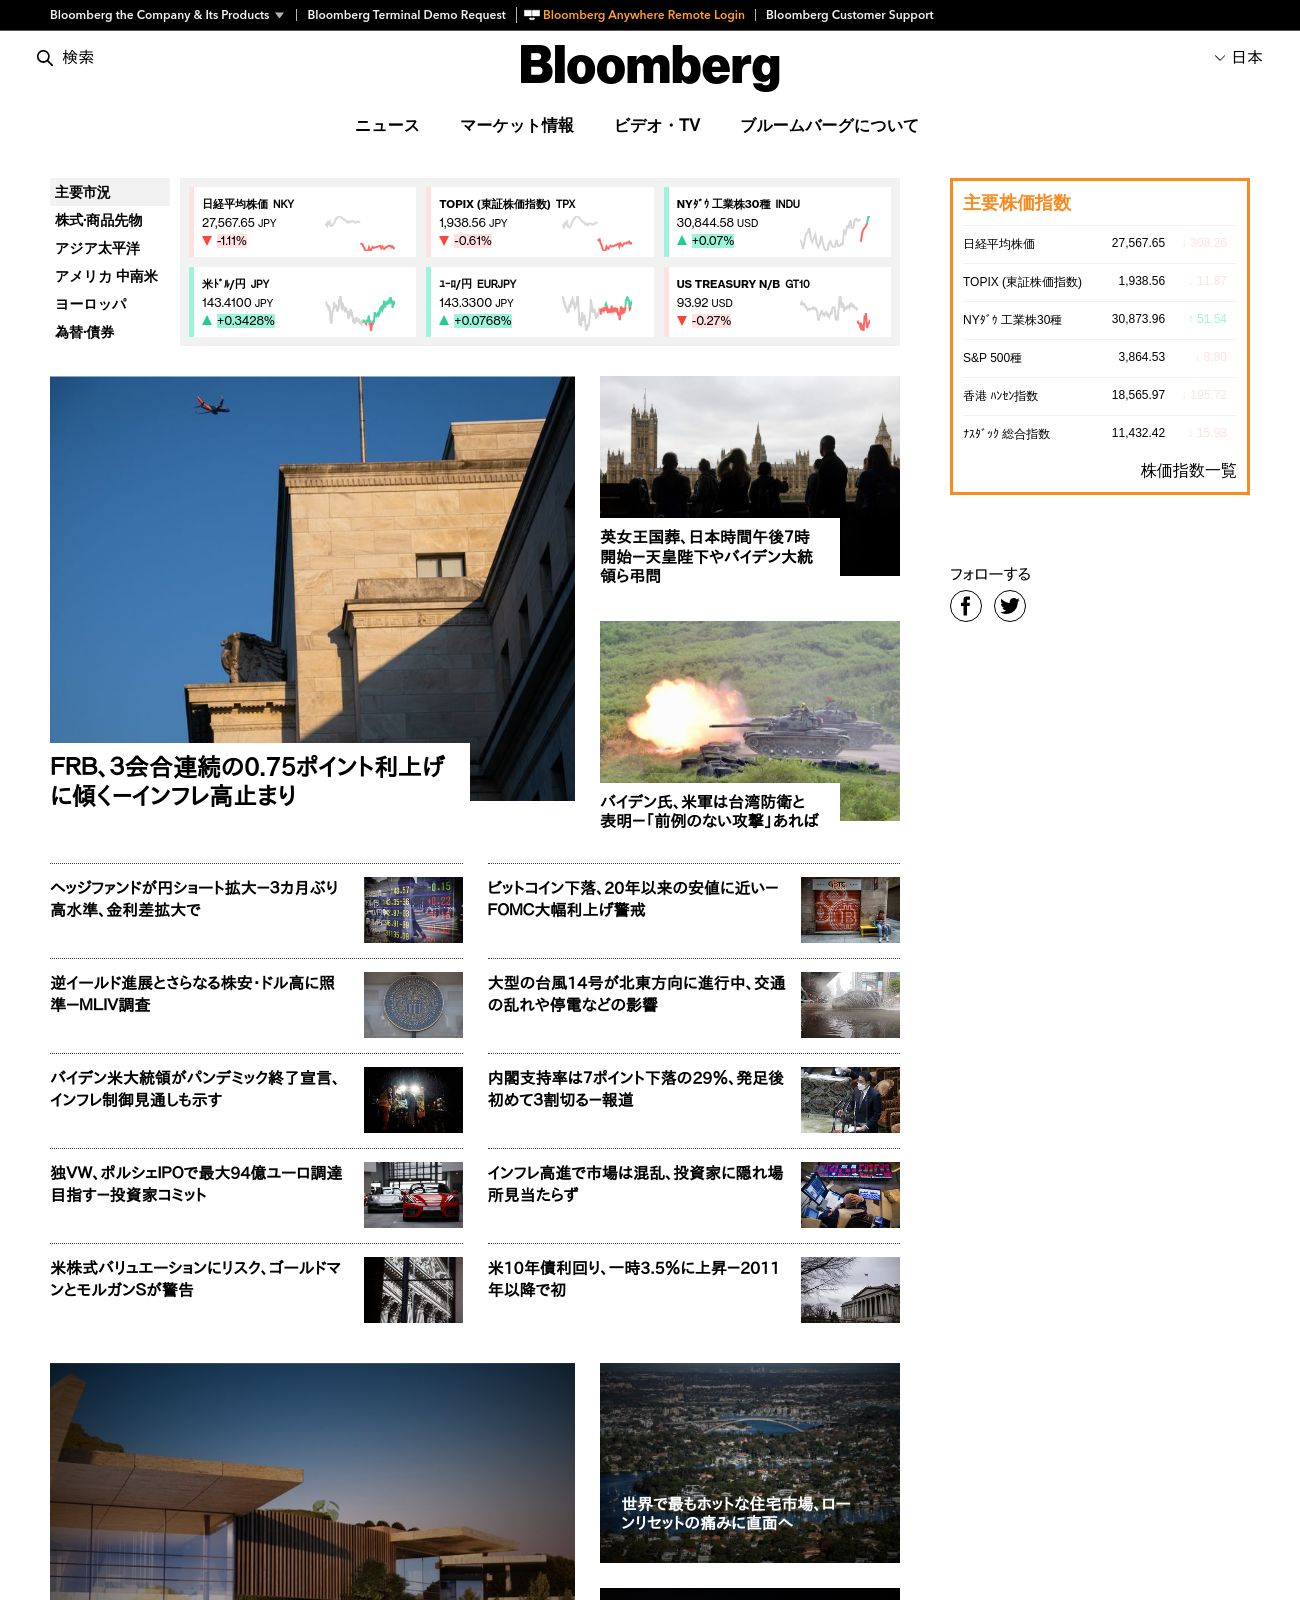 Bloomberg Japan at 2022-09-19 23:59:14+09:00 local time